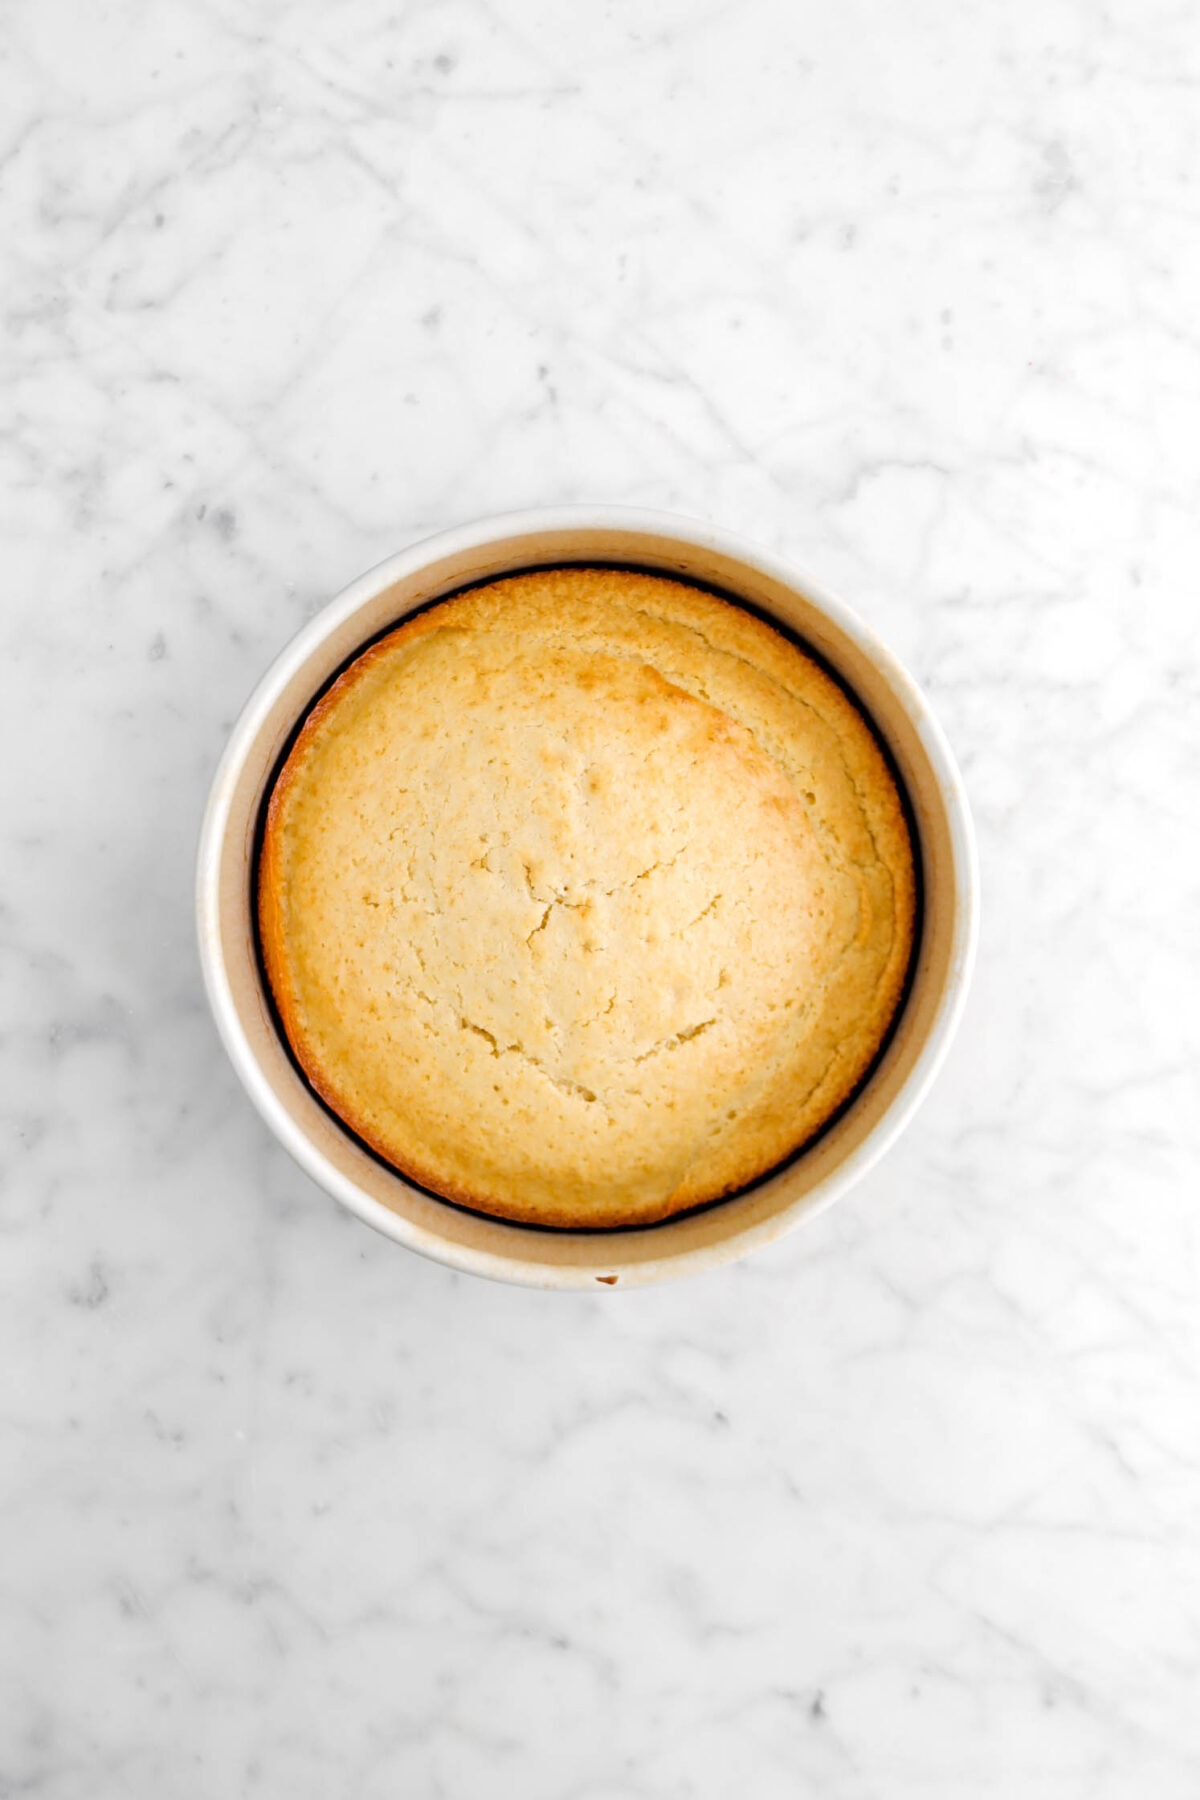 baked cake in round cake pan on marble surface